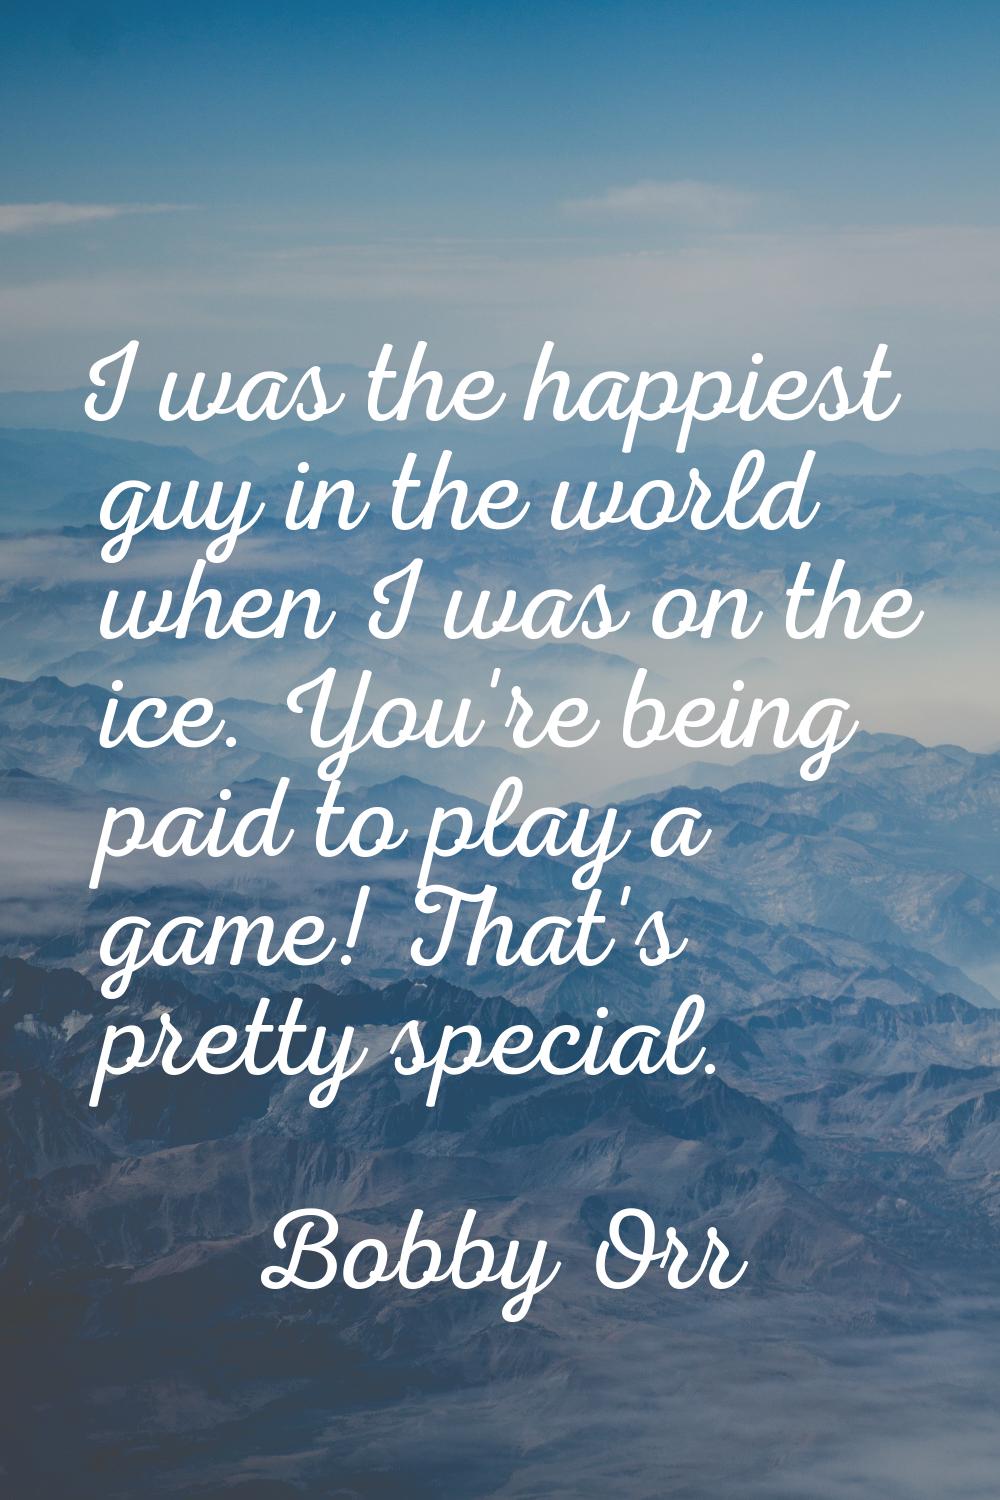 I was the happiest guy in the world when I was on the ice. You're being paid to play a game! That's